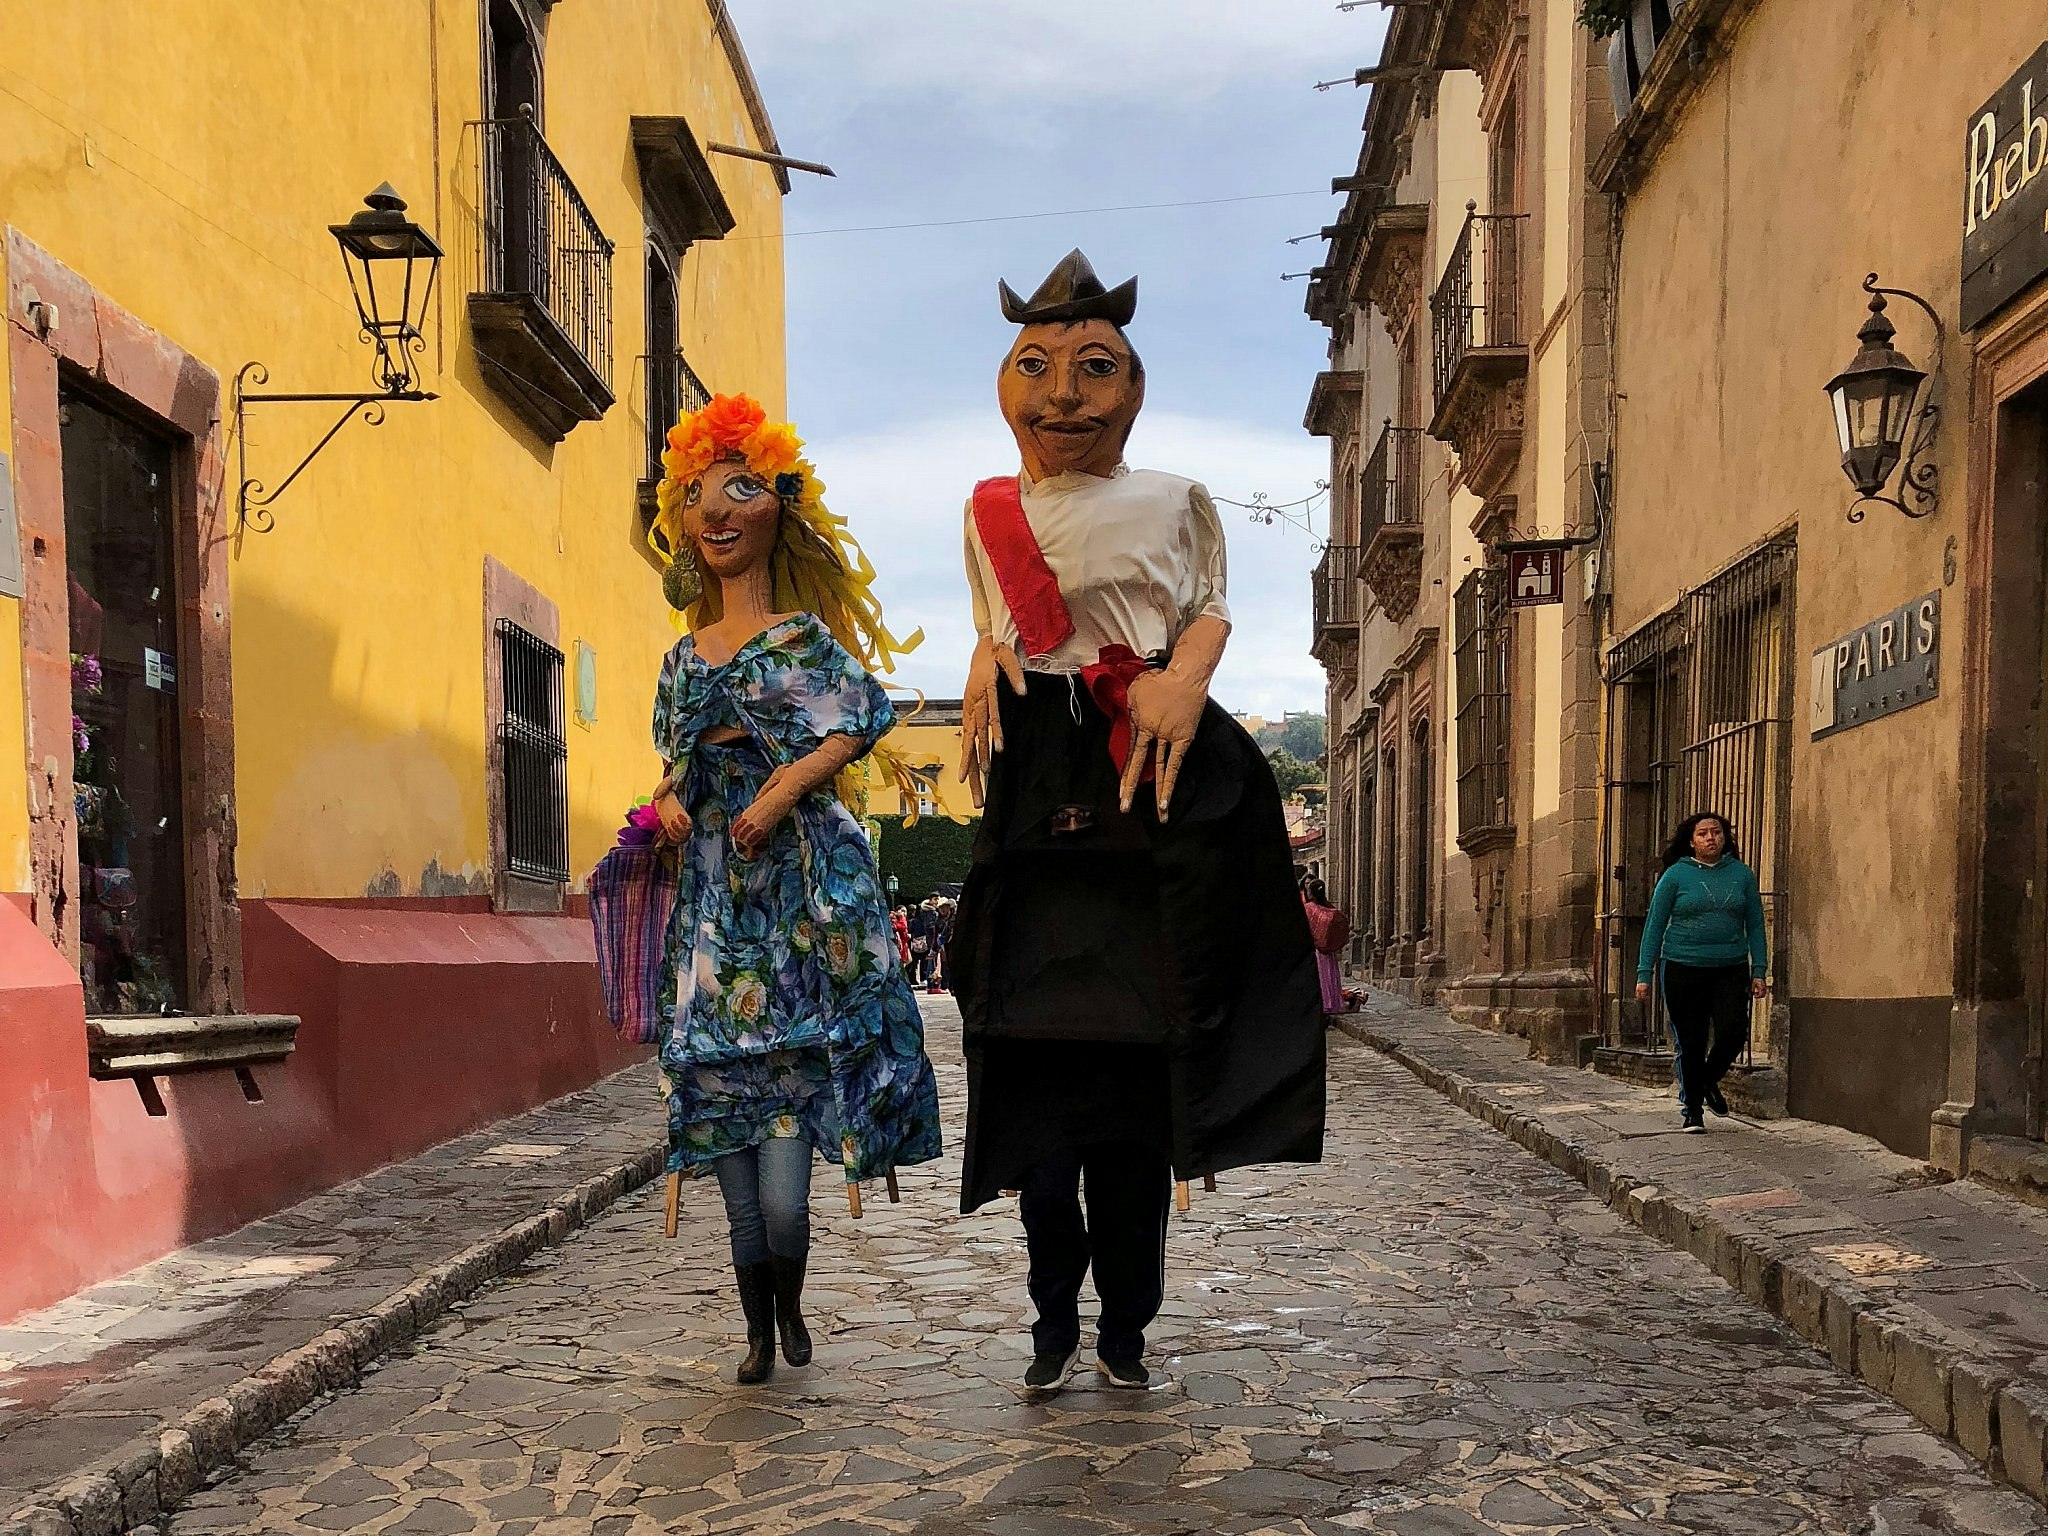 Two people dressed as giants with enormous paper mache heads walk down a street lined with colourful period buildings in San Miguel de Allende, Mexico.